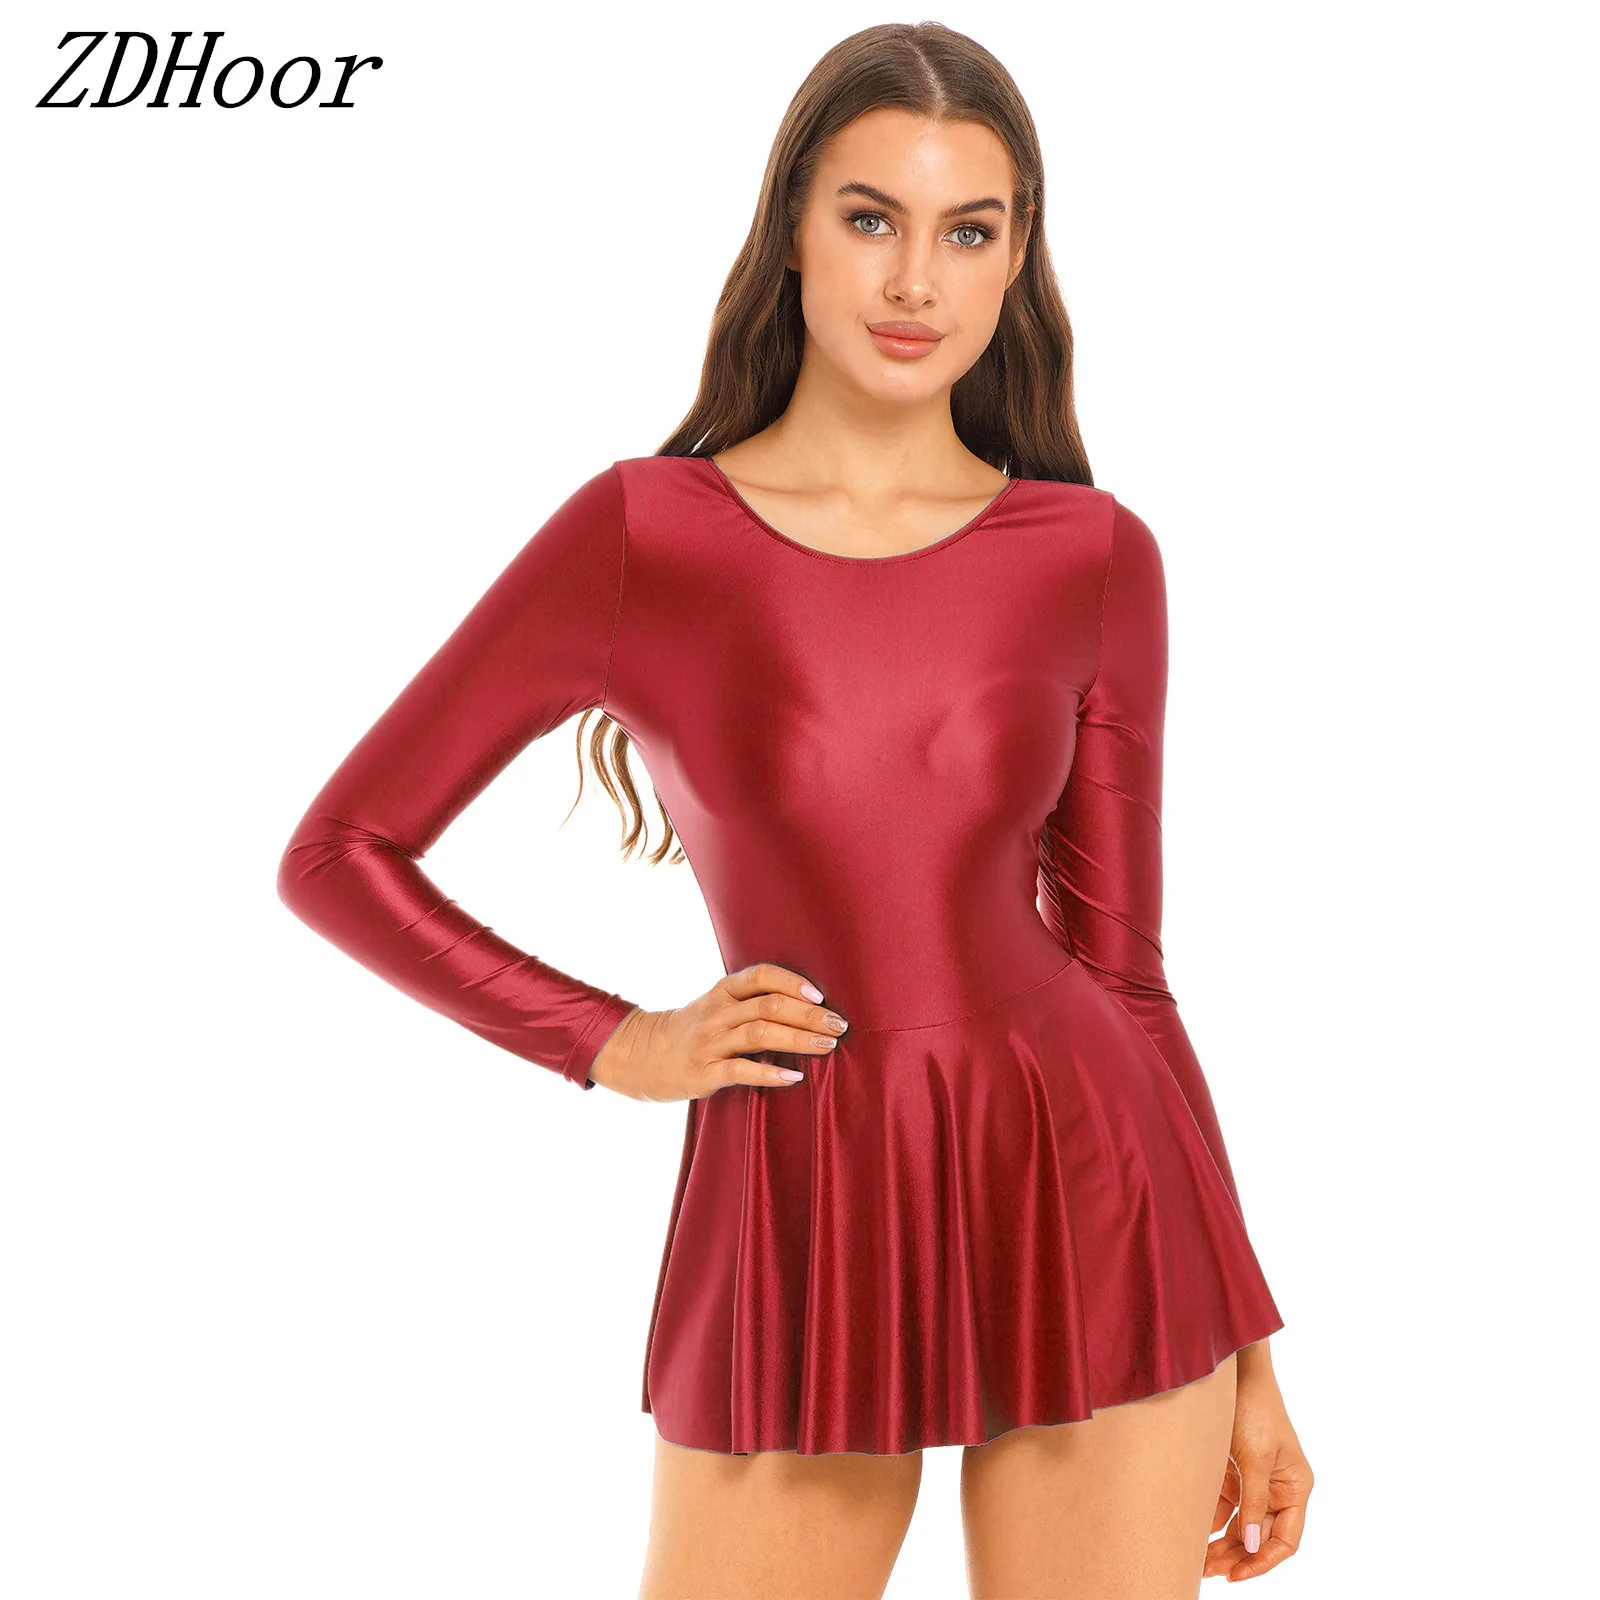 

Womens Glossy Long Sleeve Ruffled Dress Solid Color Round Neck Leotard Dresses for Sports Ballet Dance Swimming